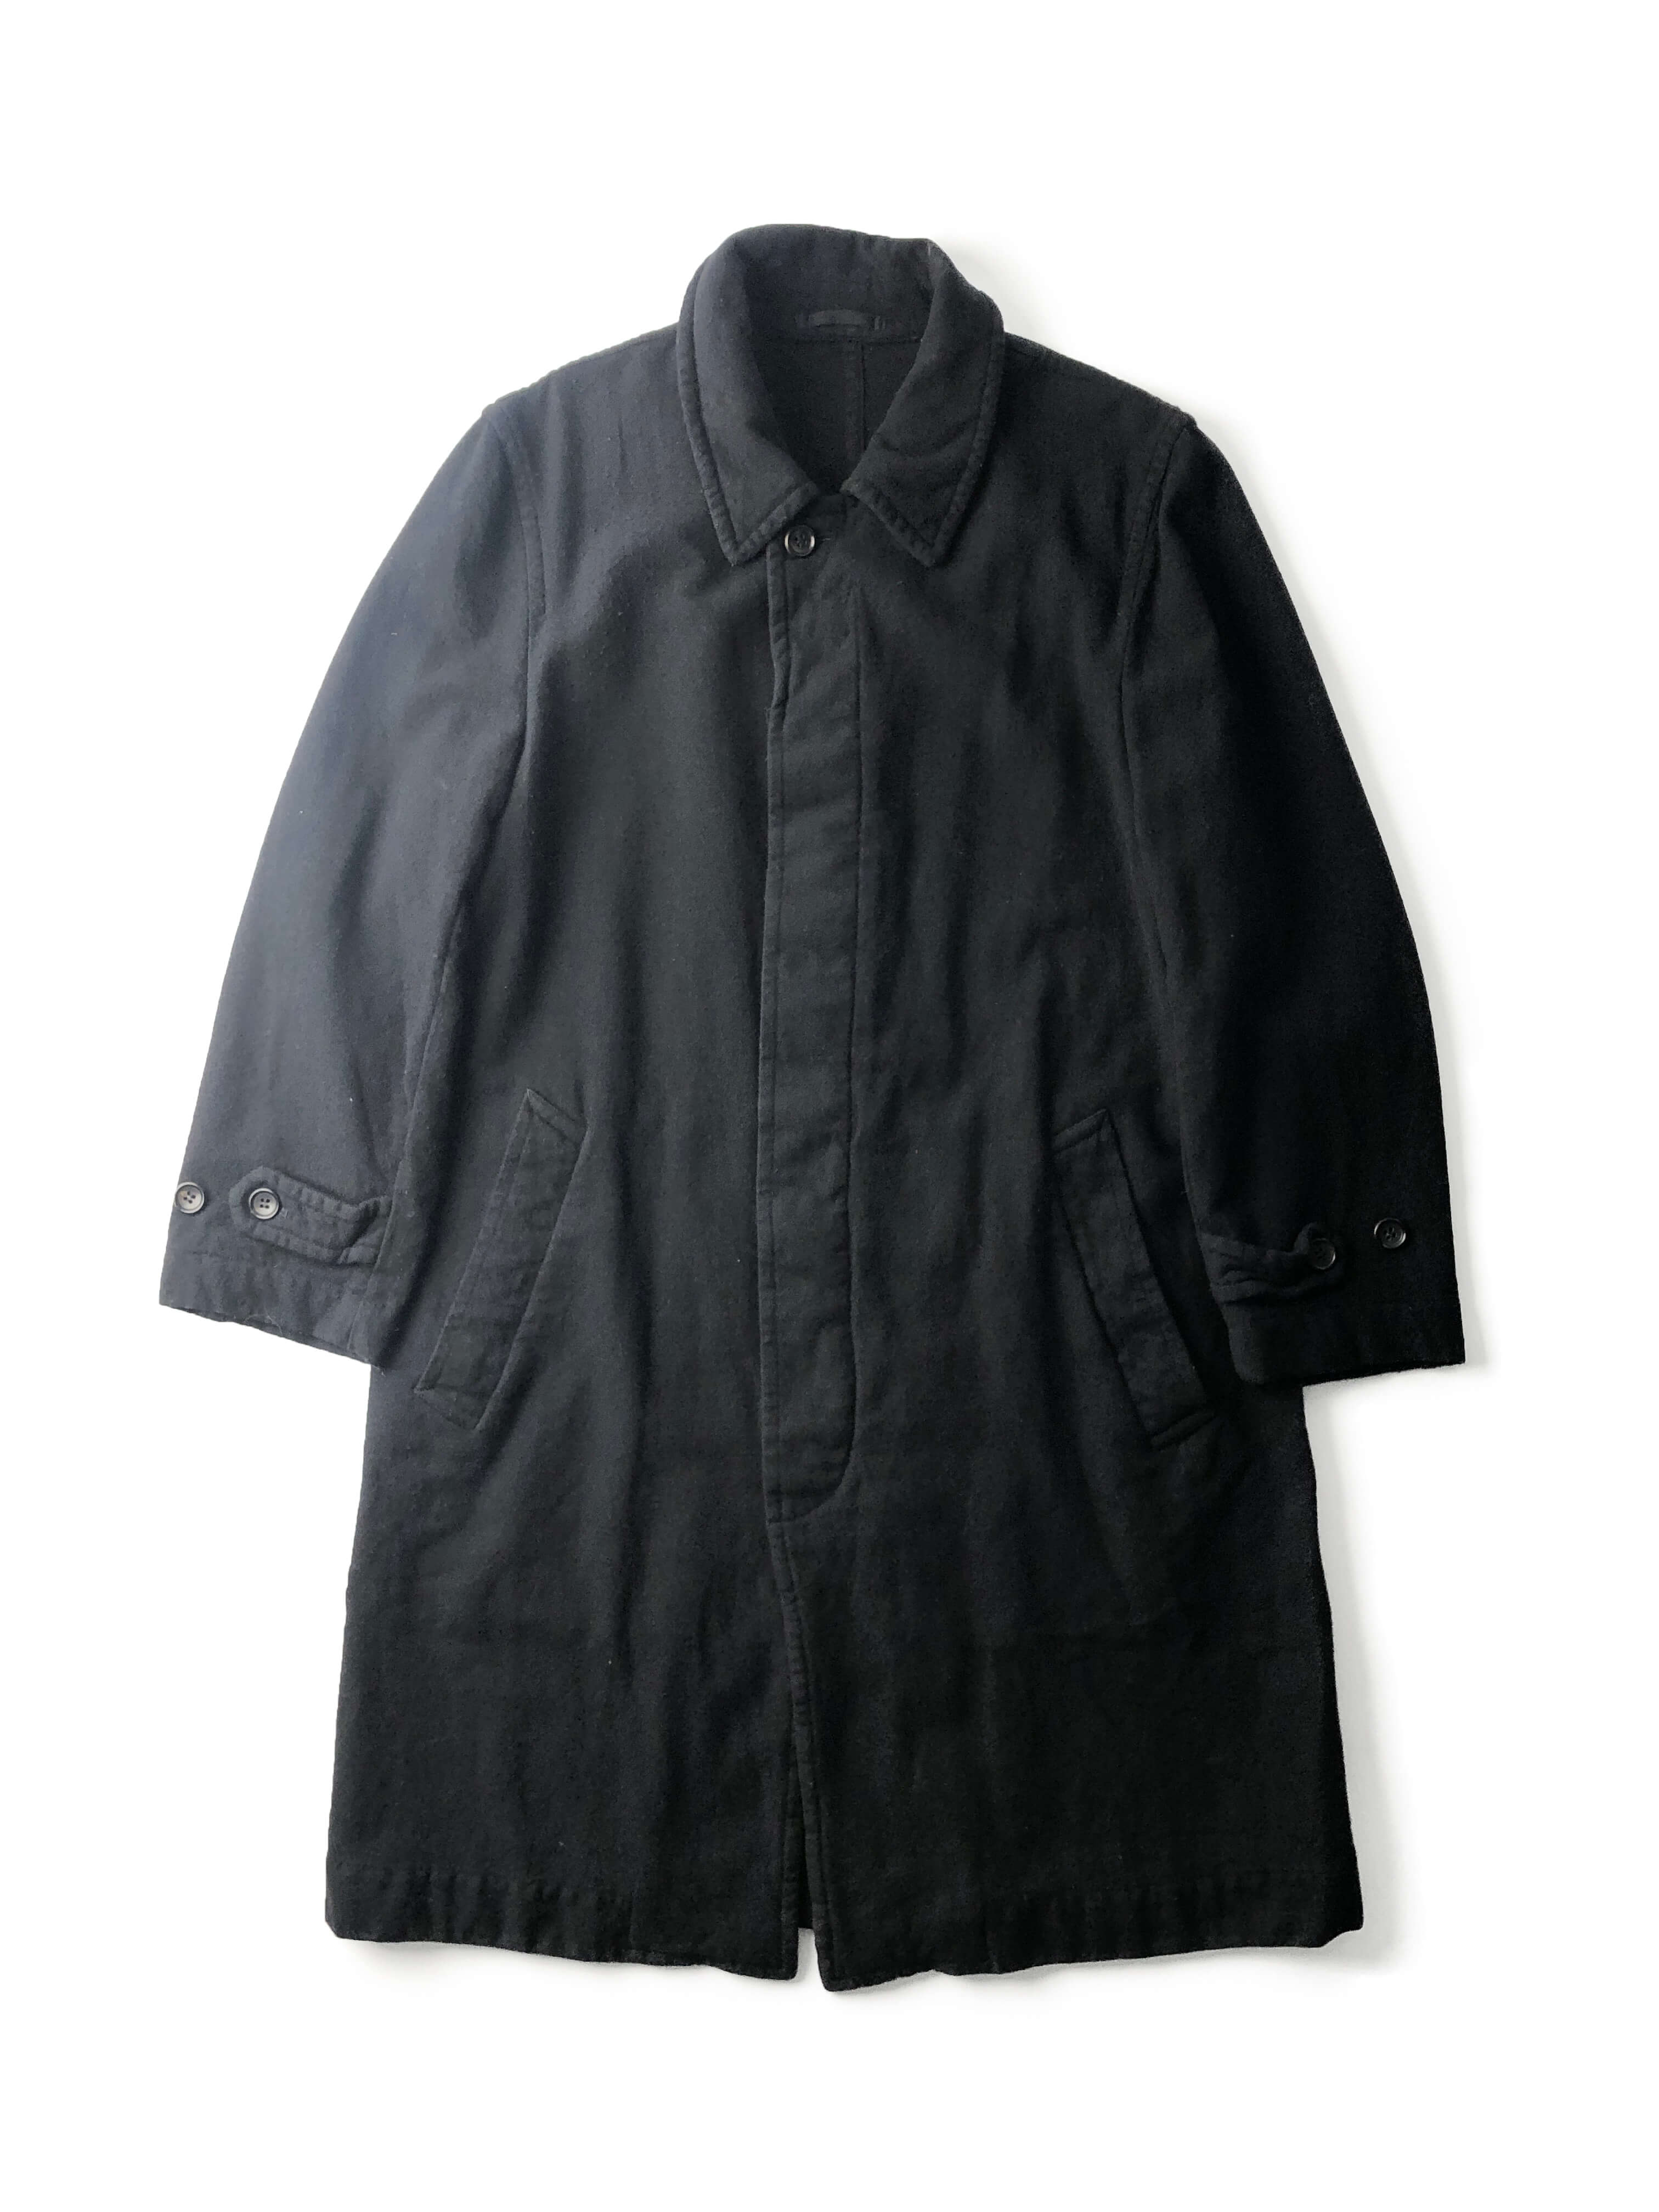 COMME des GARCONS HOMME PLUS 2000aw boiled wool coat